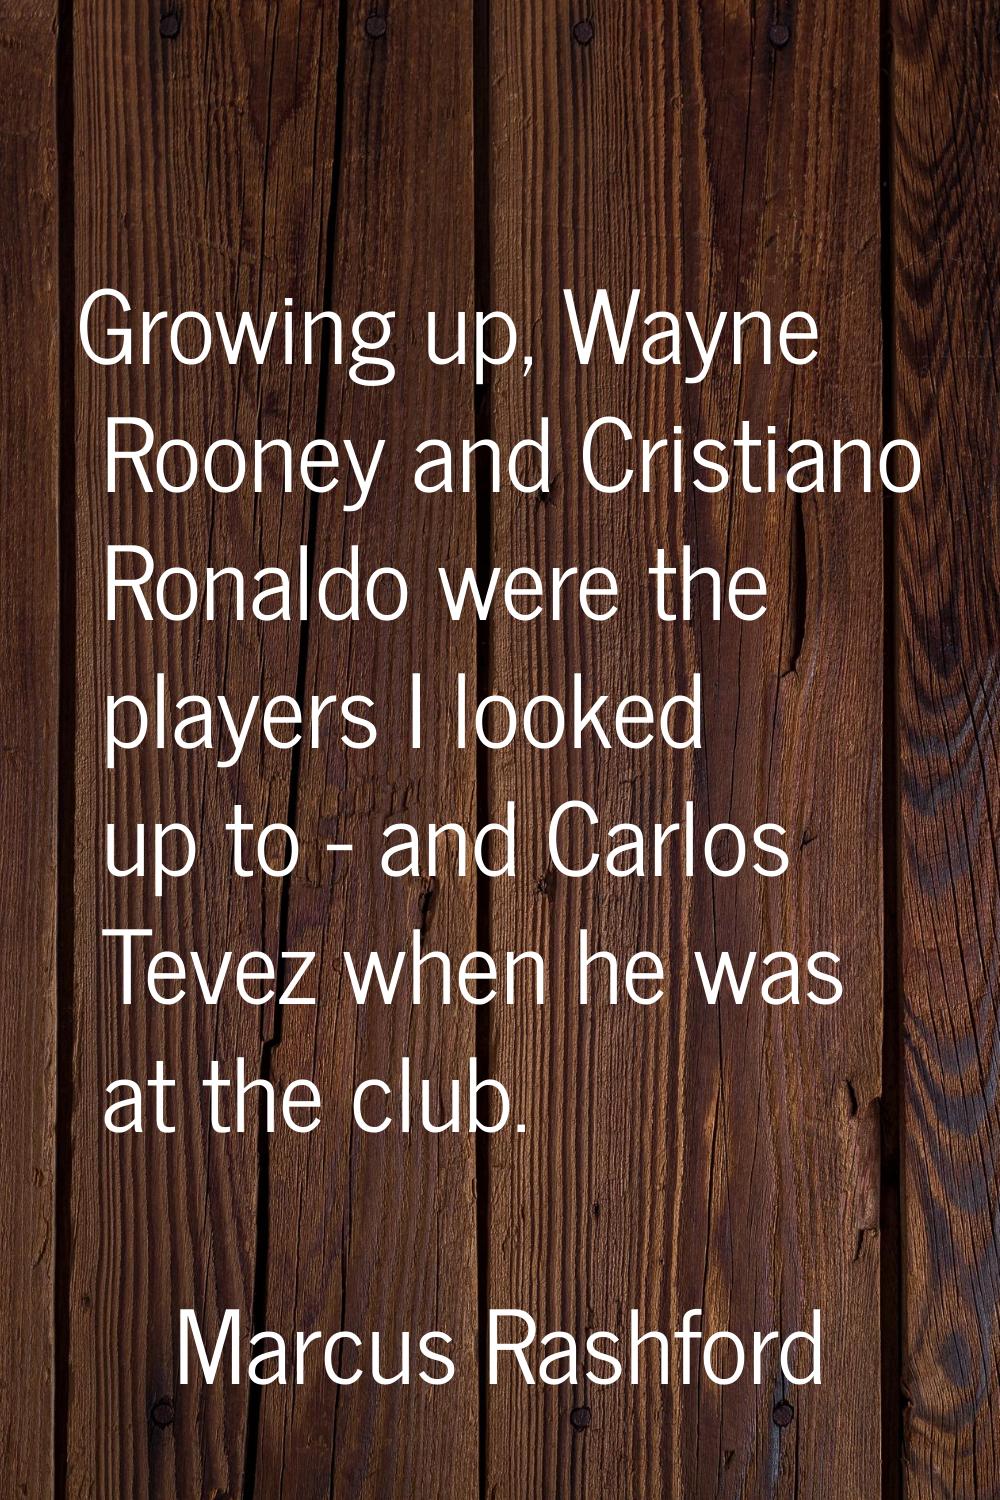 Growing up, Wayne Rooney and Cristiano Ronaldo were the players I looked up to - and Carlos Tevez w